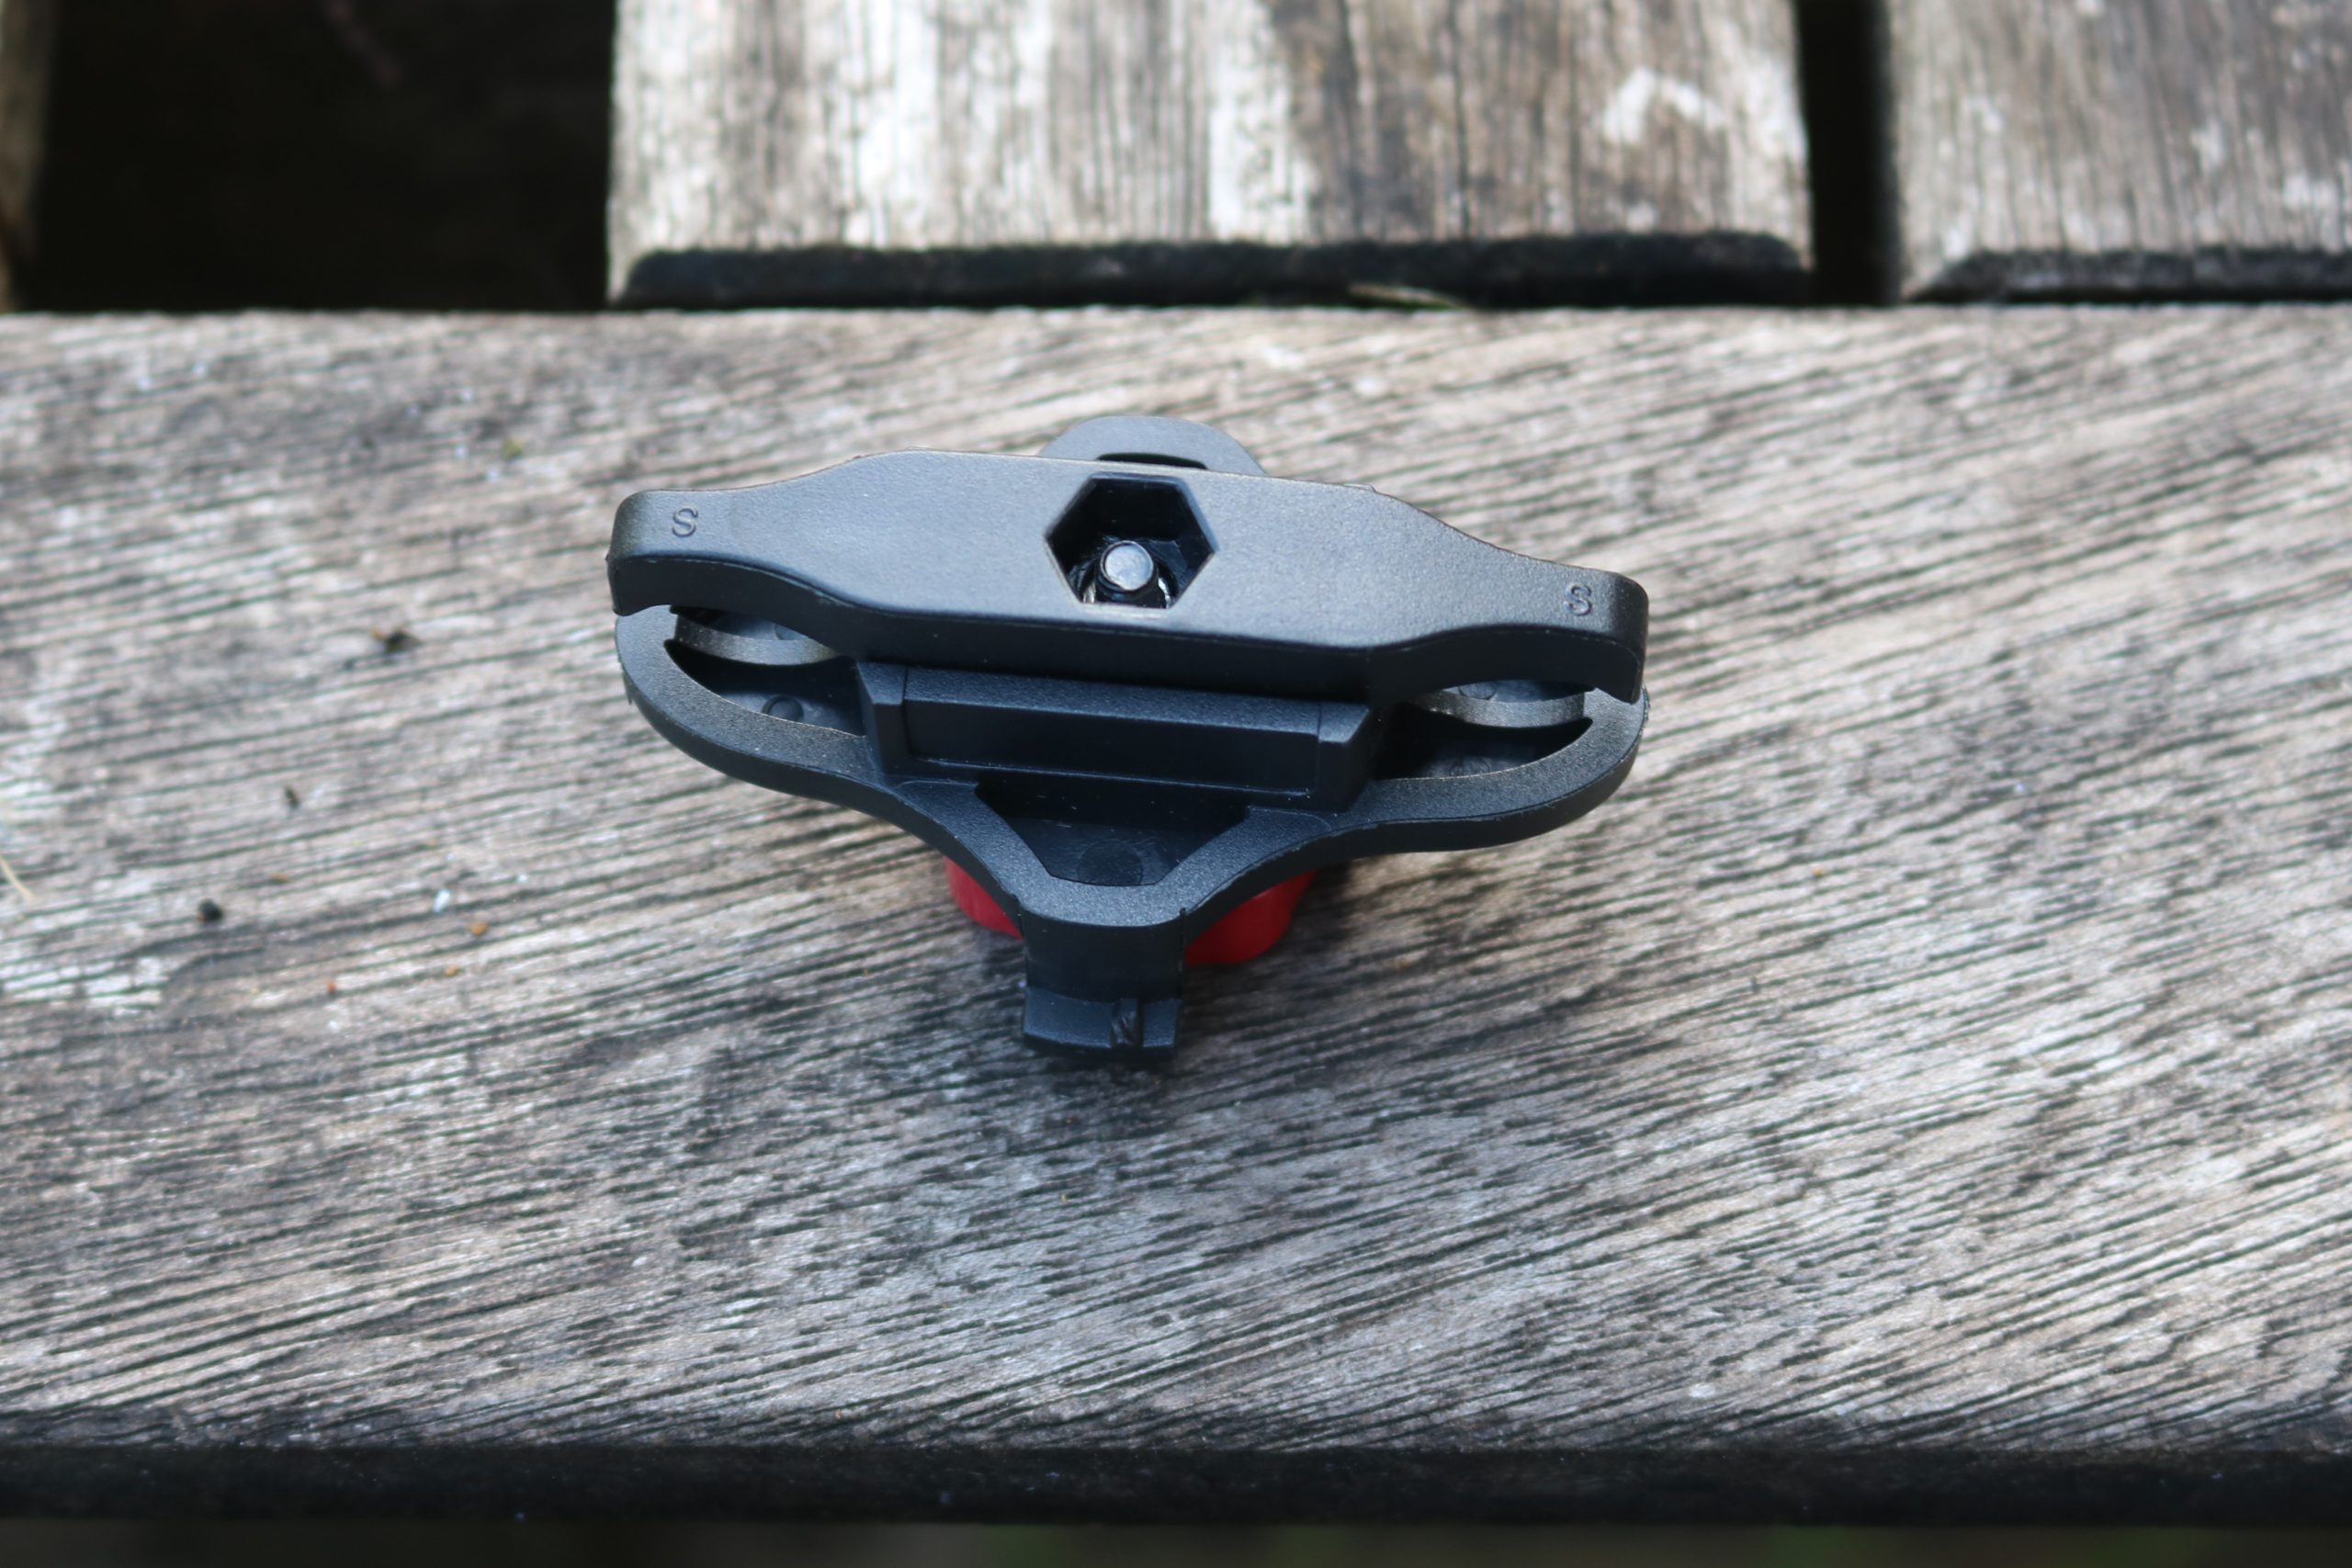 Rail clamp is easy to attach and gives a stable hold